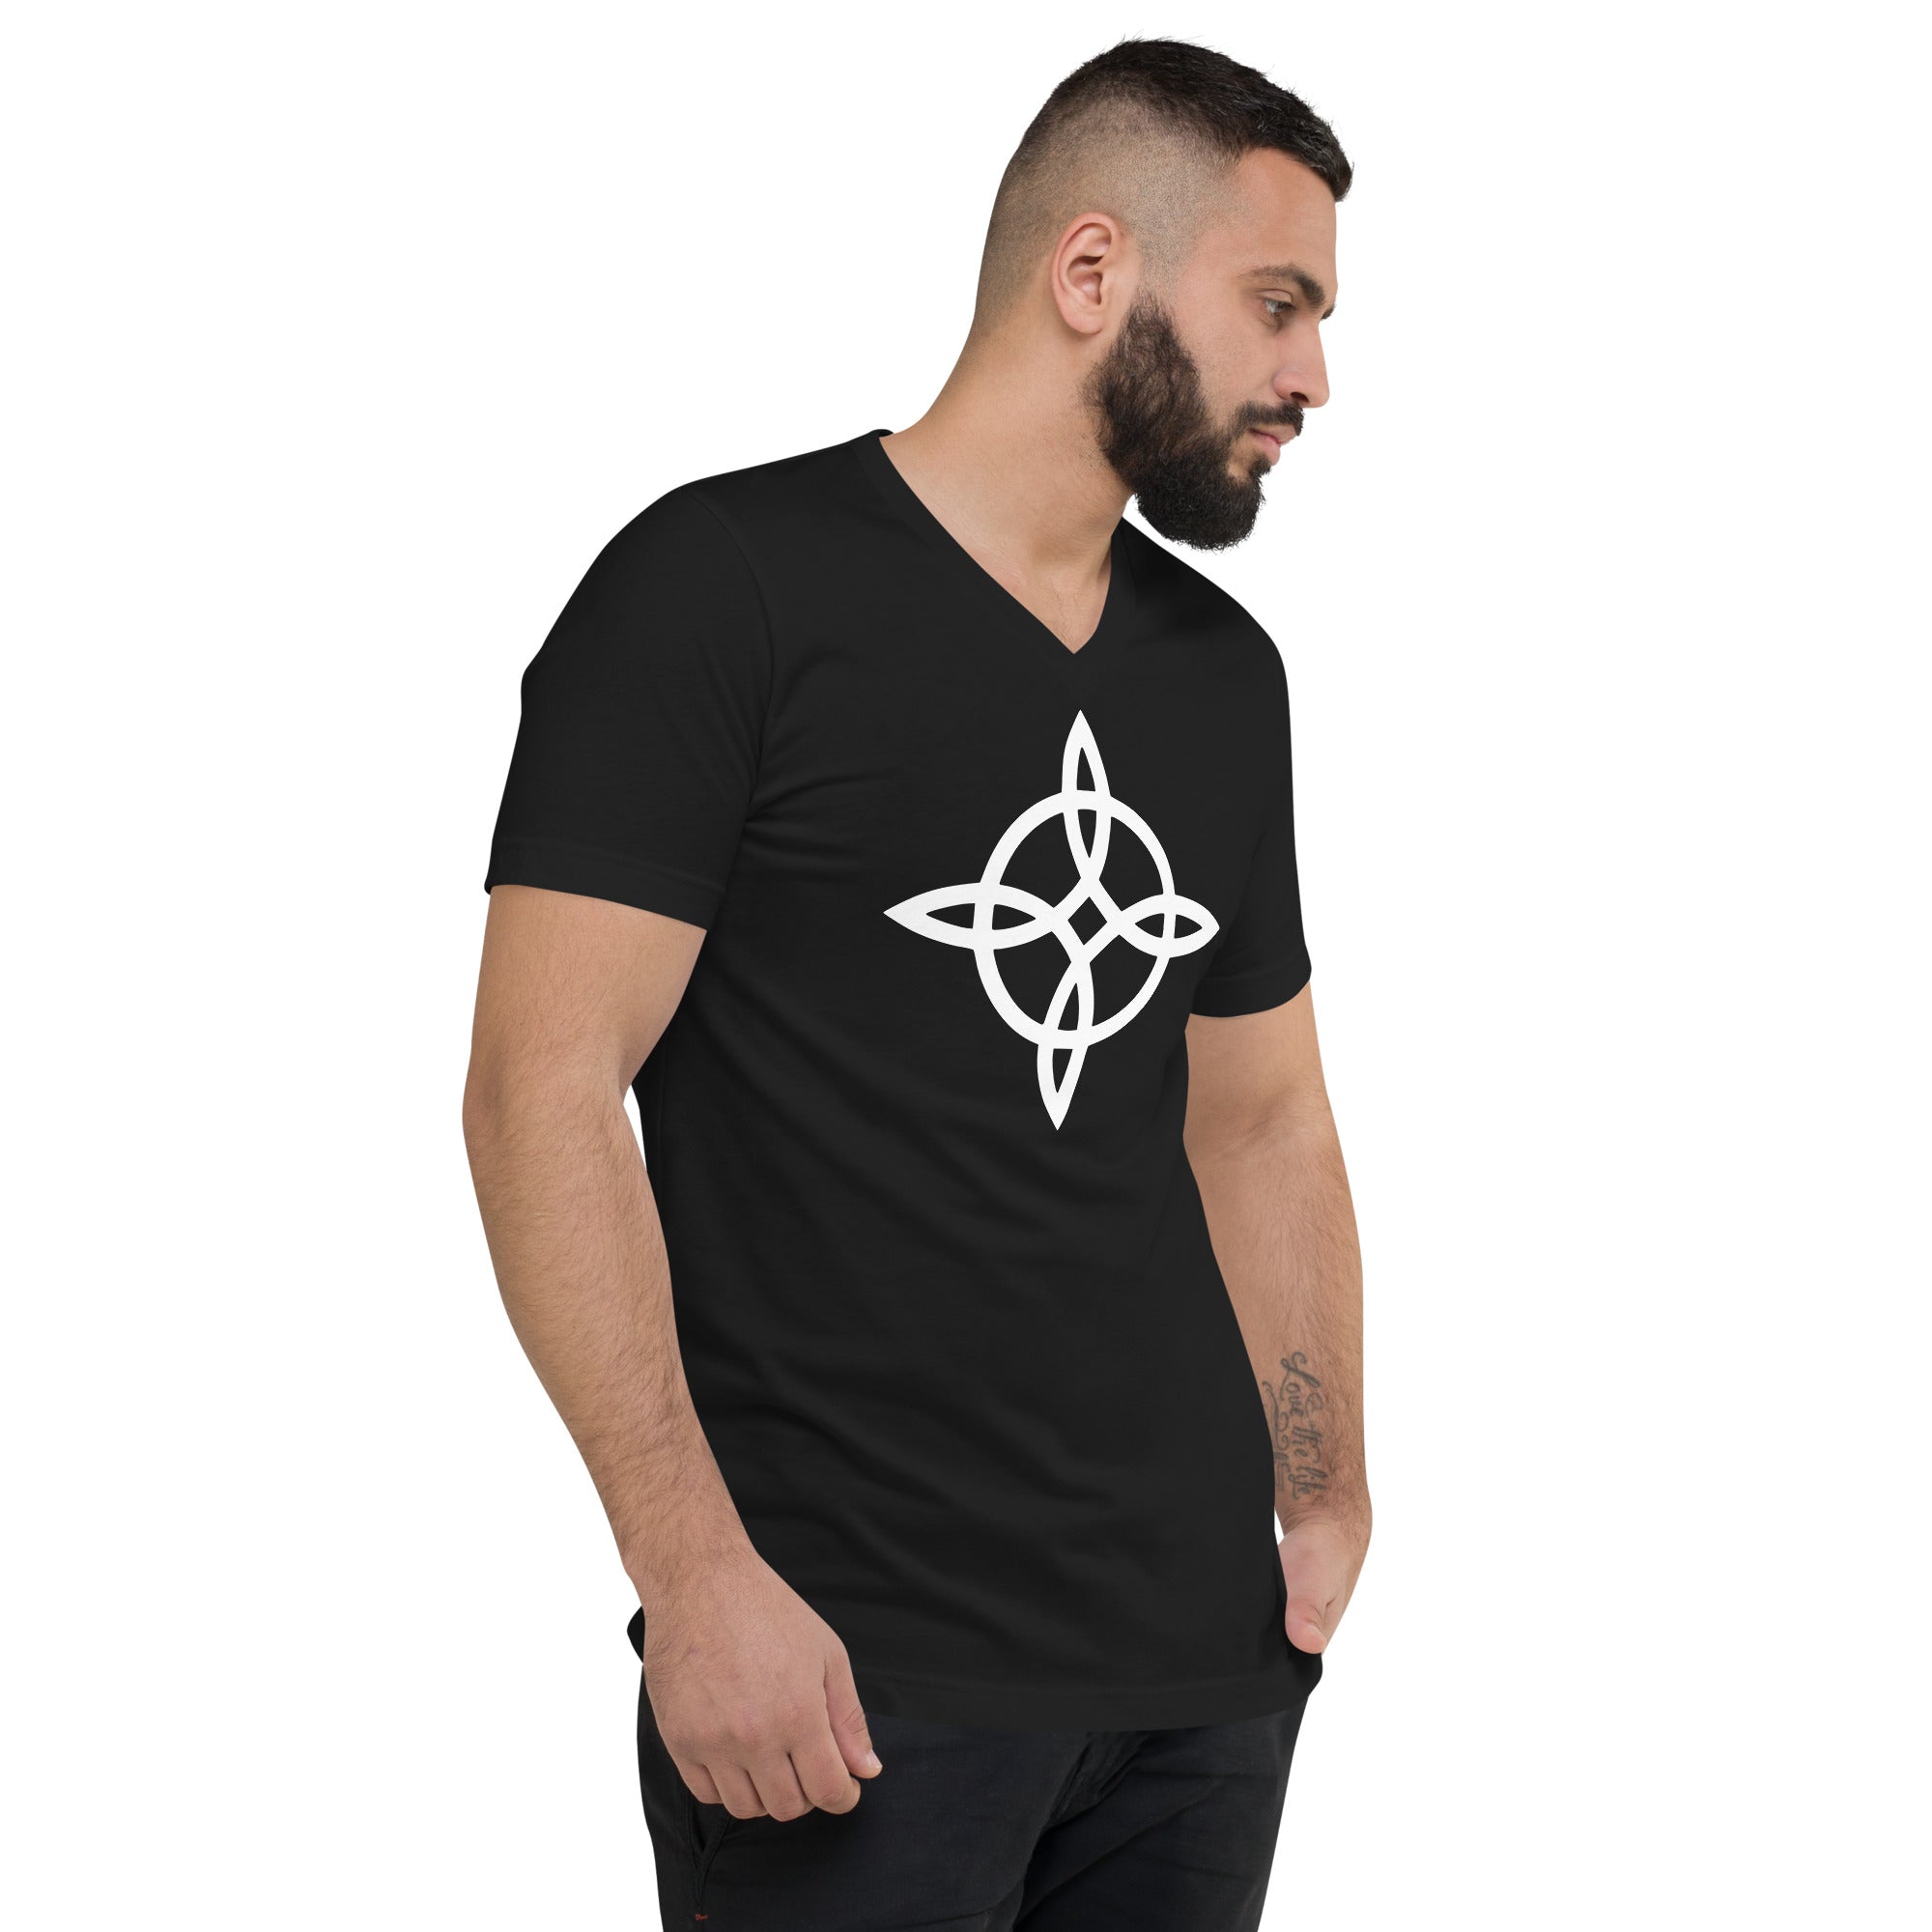 The Witches Knot Witchcraft Protection Symbol Short Sleeve V-Neck T-Shirt